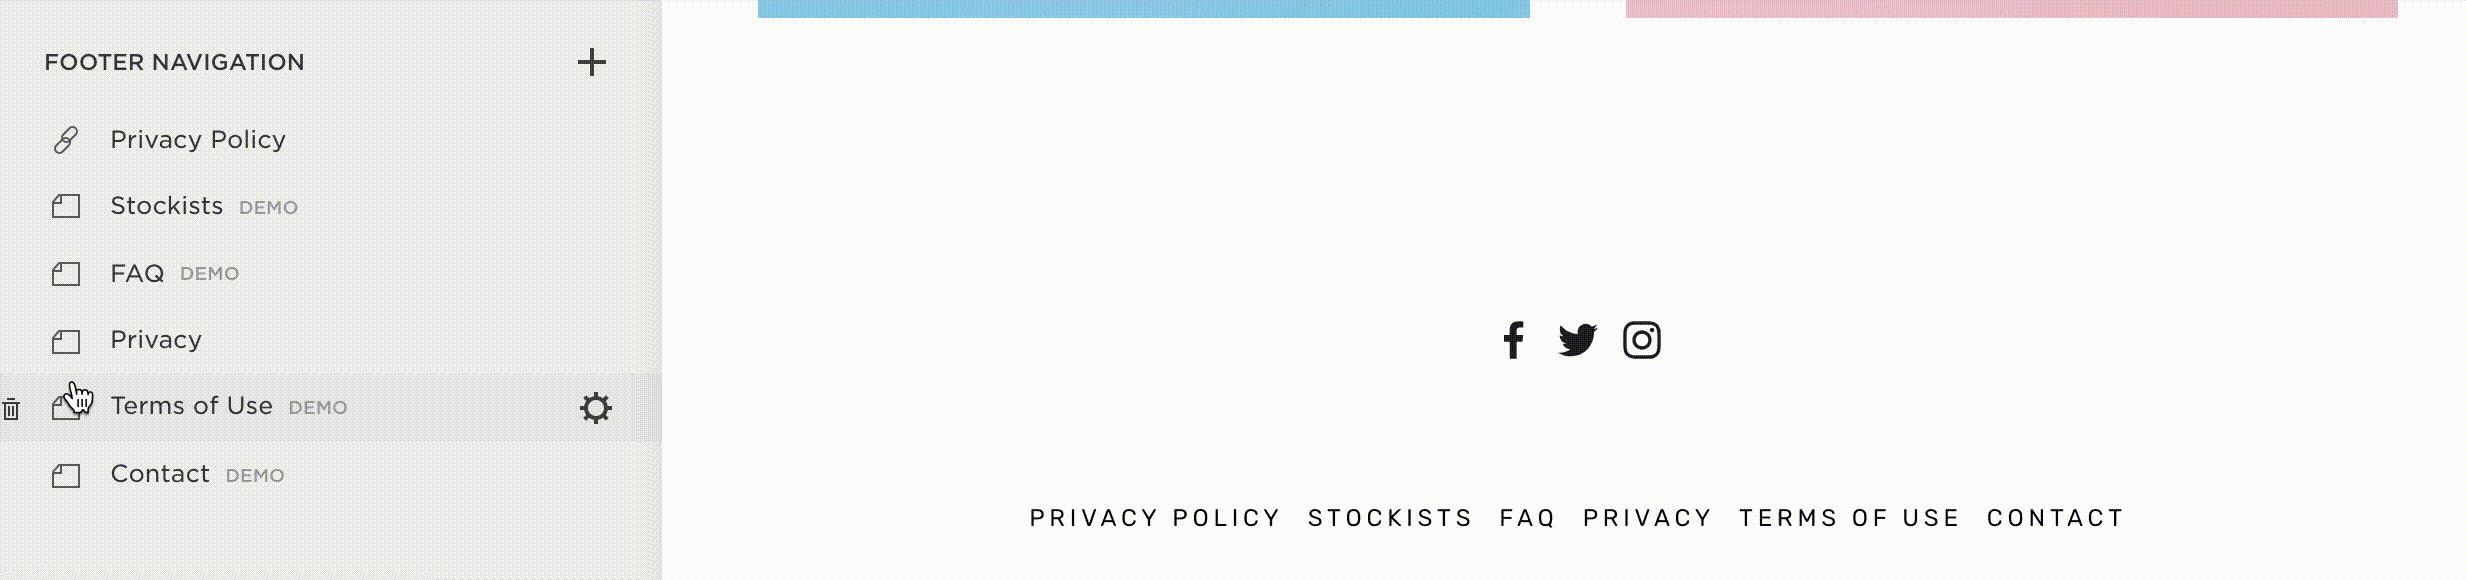 Squarespace - Privacy Policy